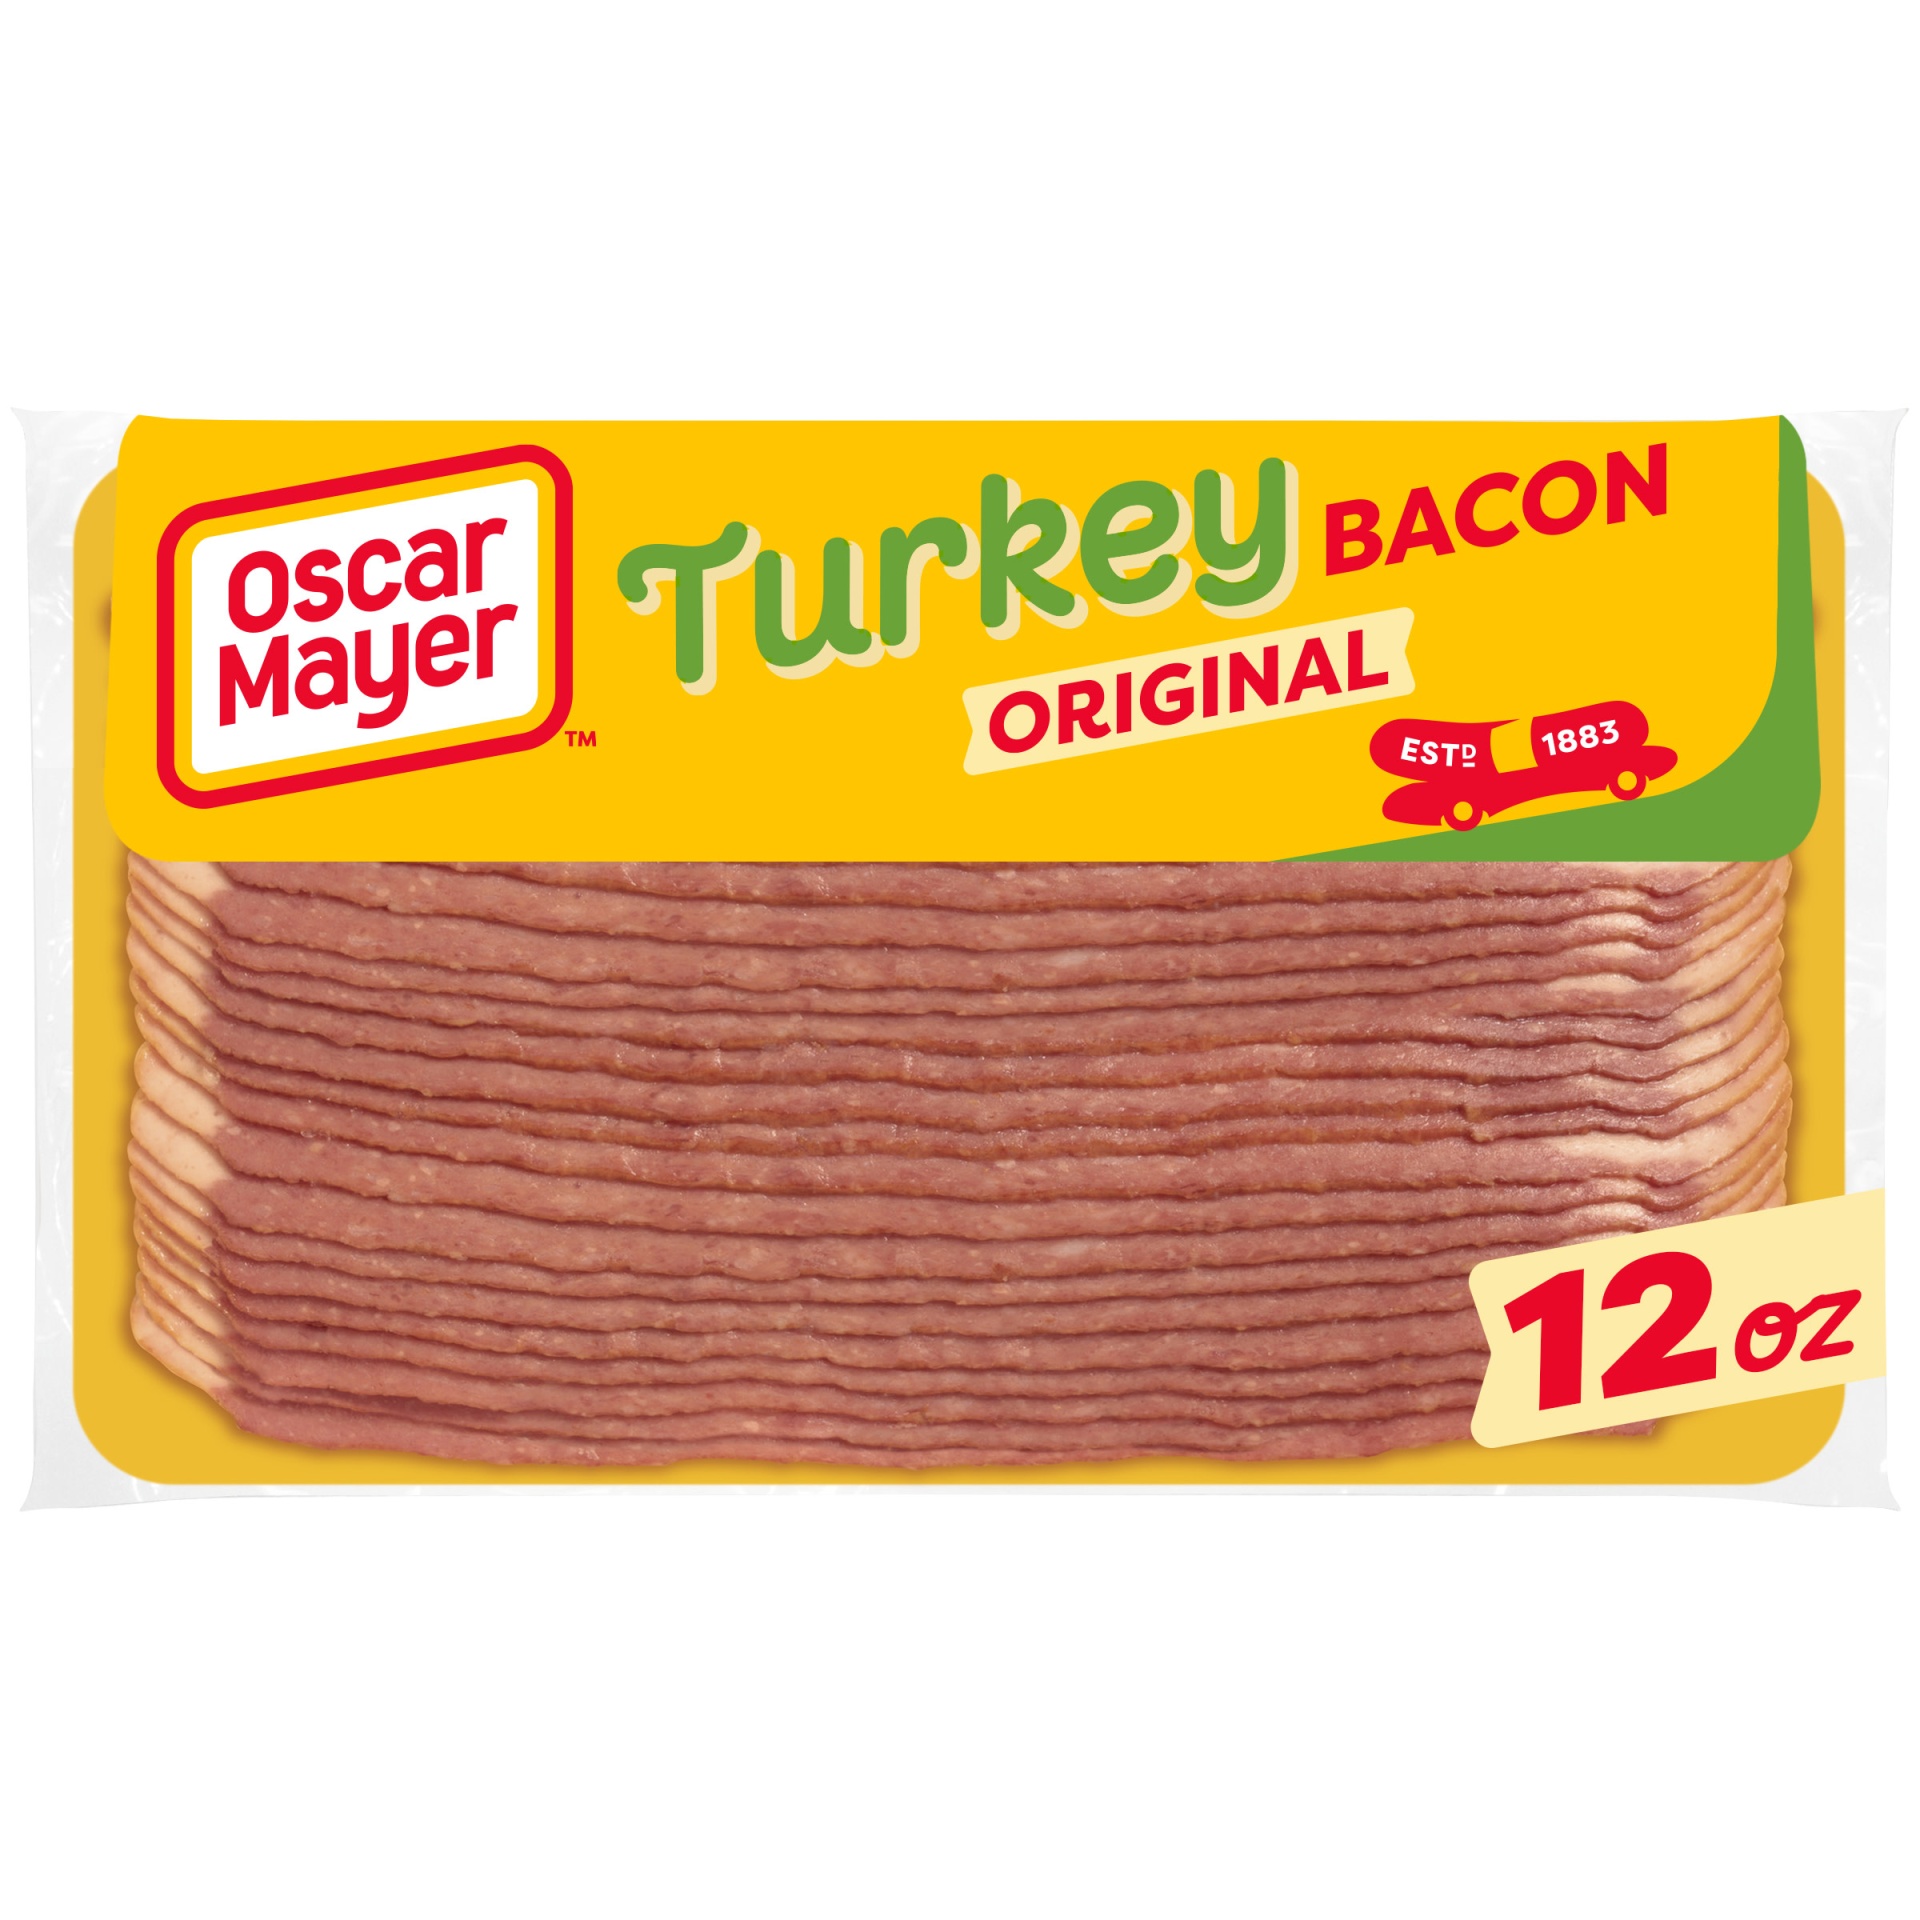 slide 1 of 7, Oscar Mayer Fully Cooked & Gluten Free Turkey Bacon with 58% Less Fat & 57% Less Sodium Pack, 21-23 slices, 12 oz